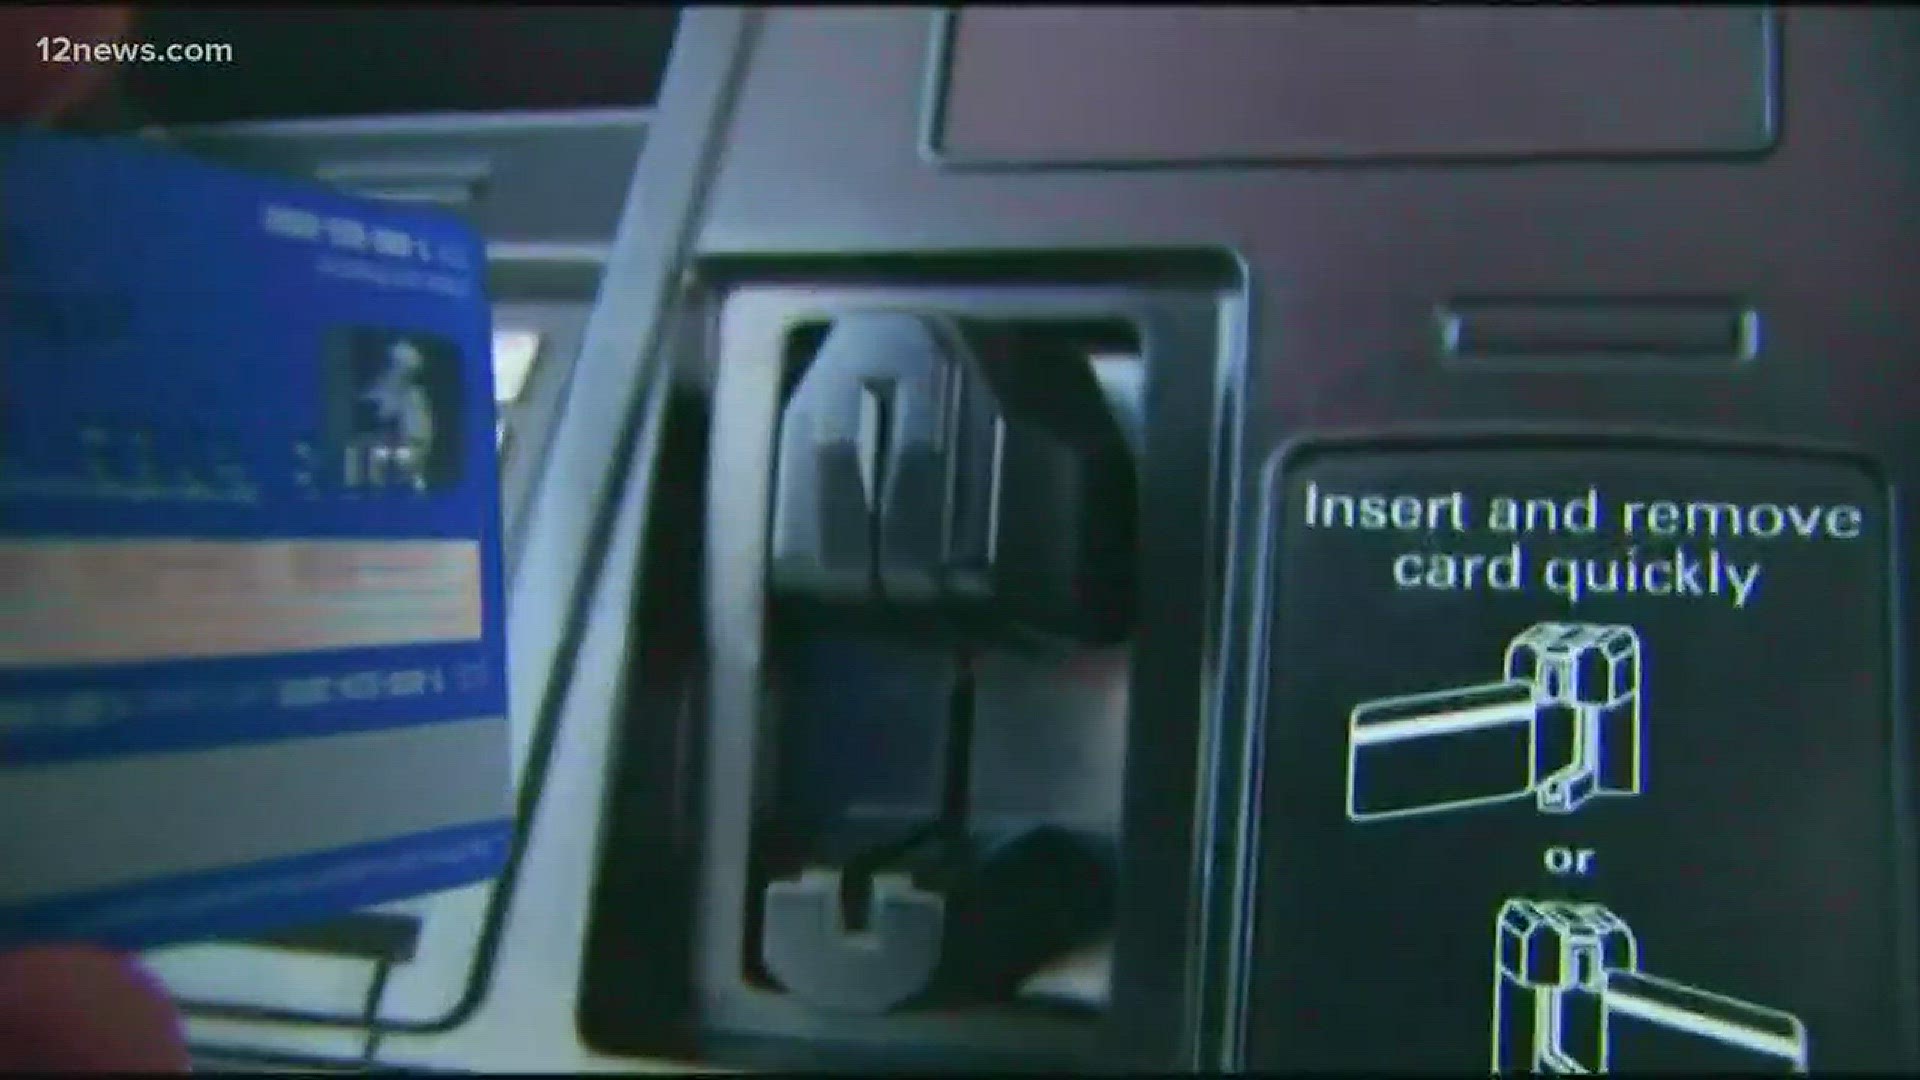 Gas station owners have until October 2020 to install new chip reading scanners or they could be held liable for any gas skimmer theft.